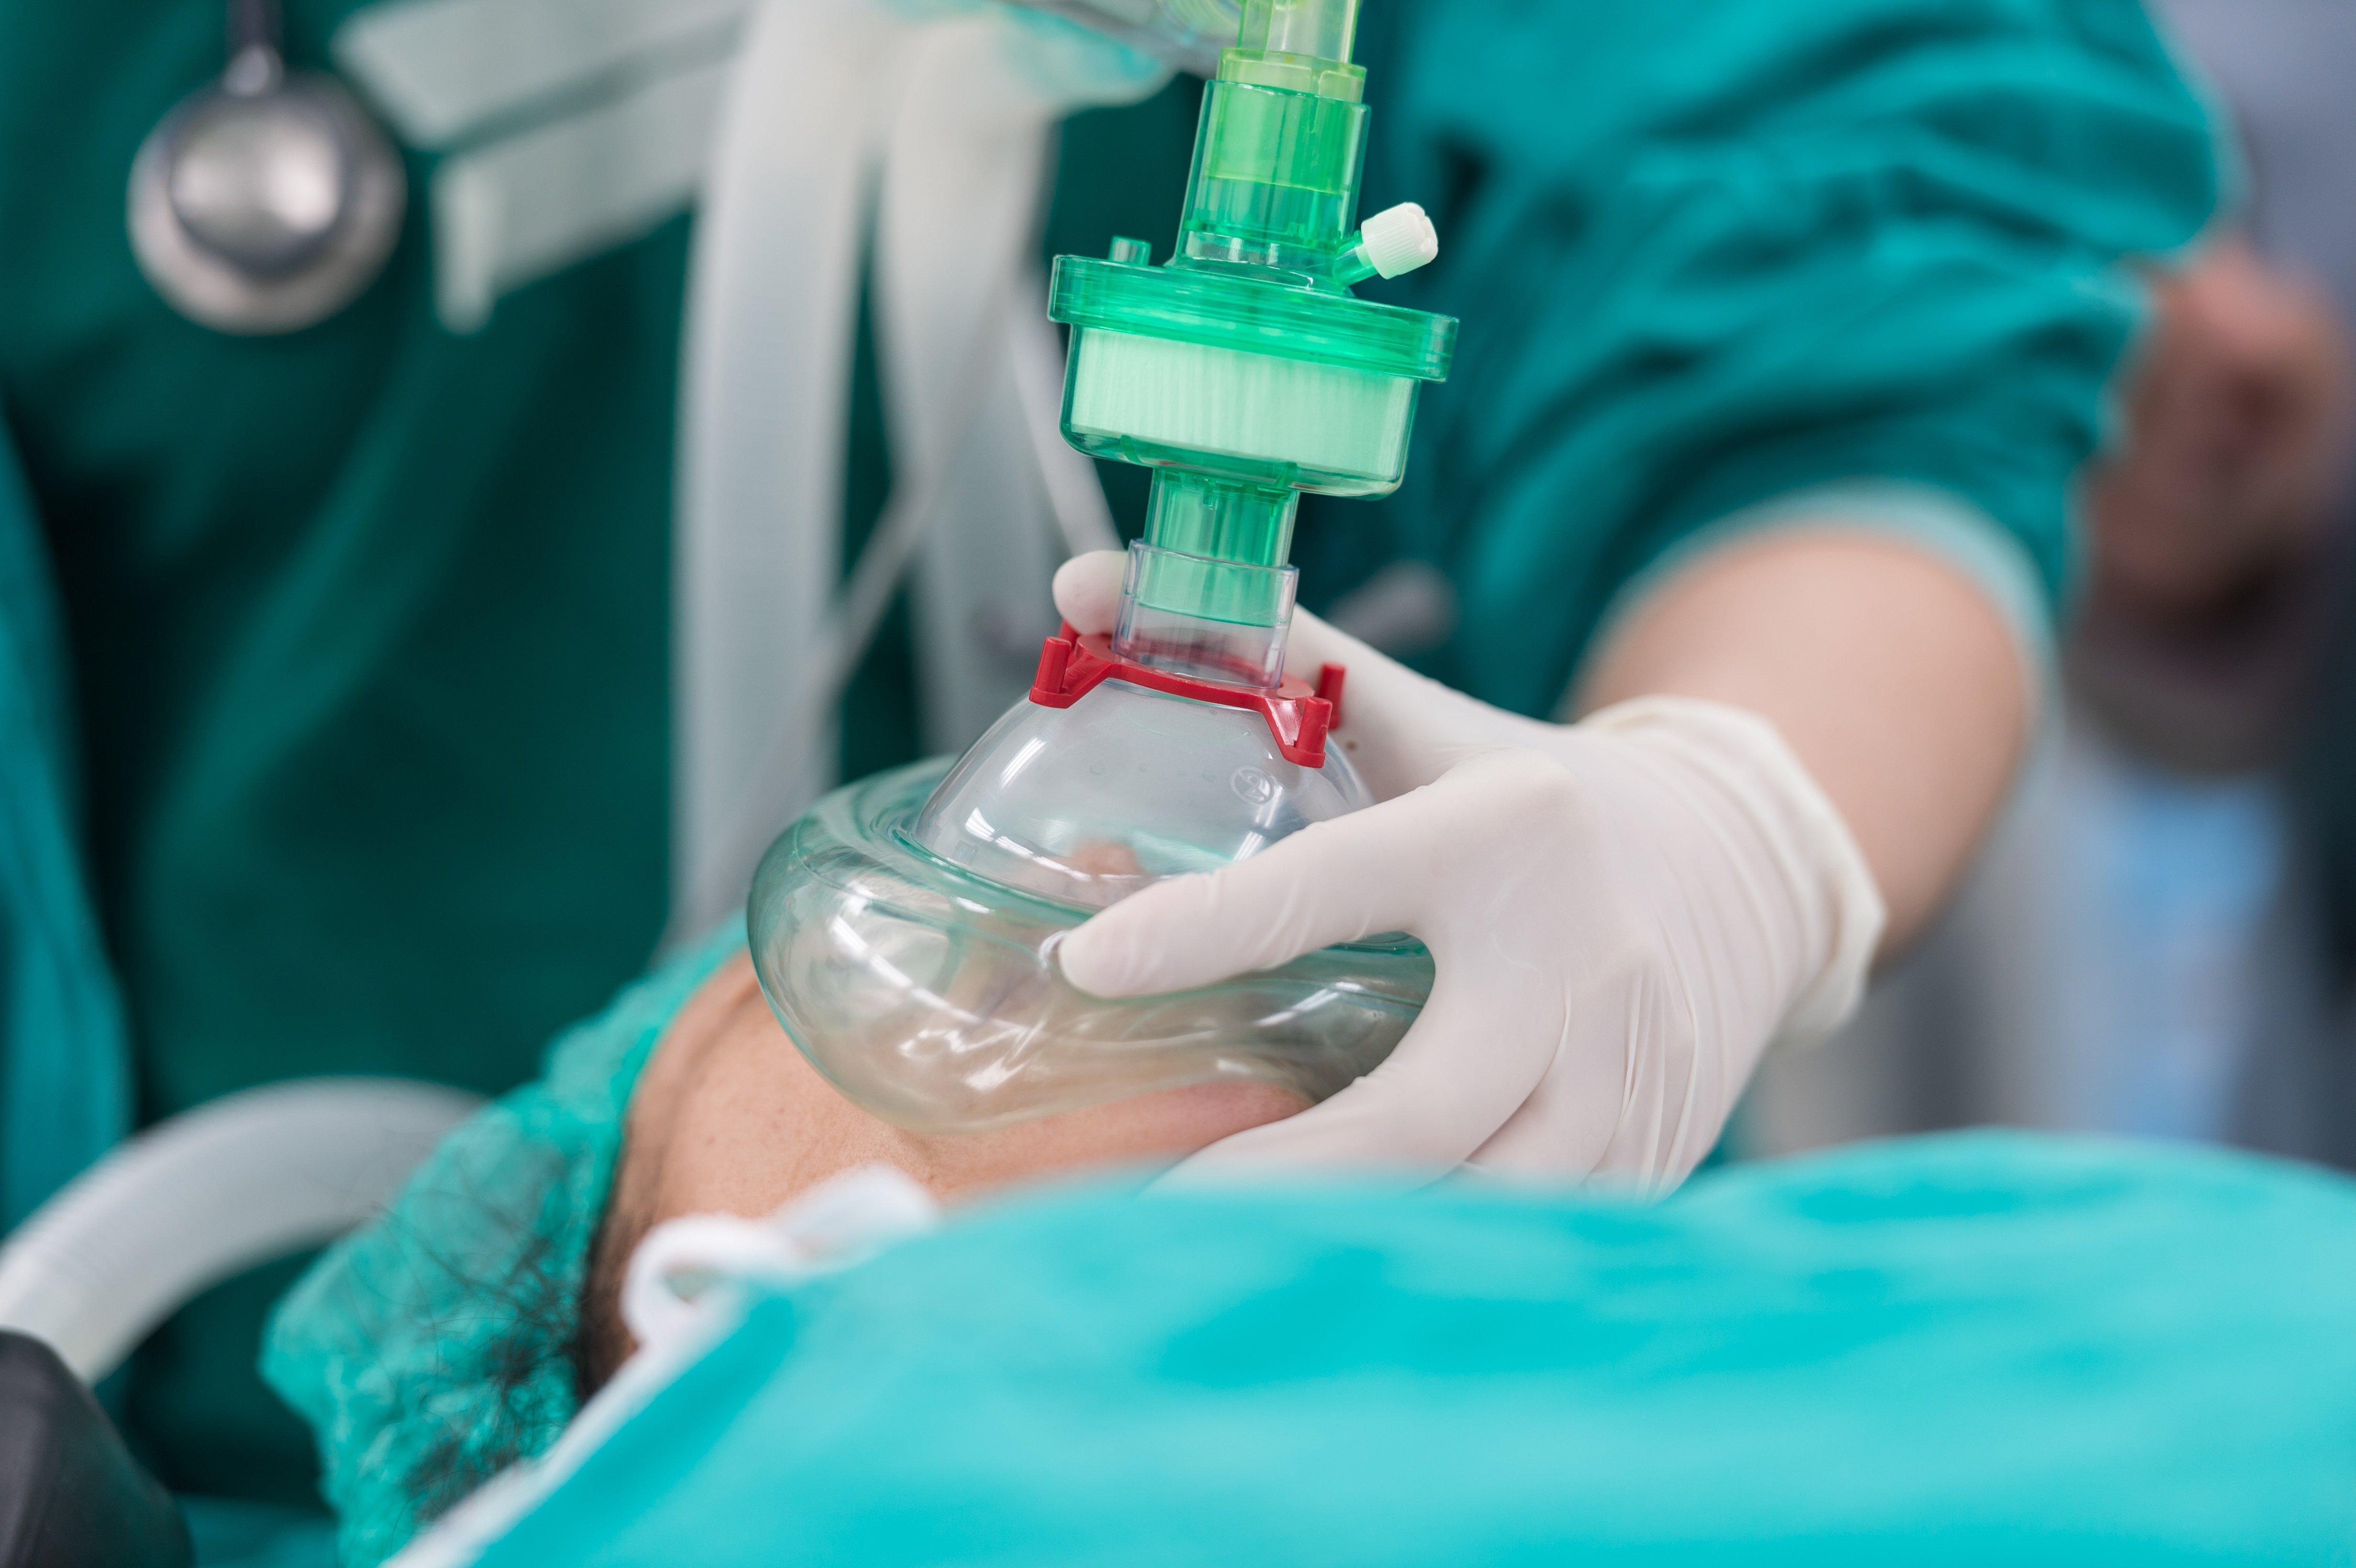 Anesthesiologists Focus on Patient Safety